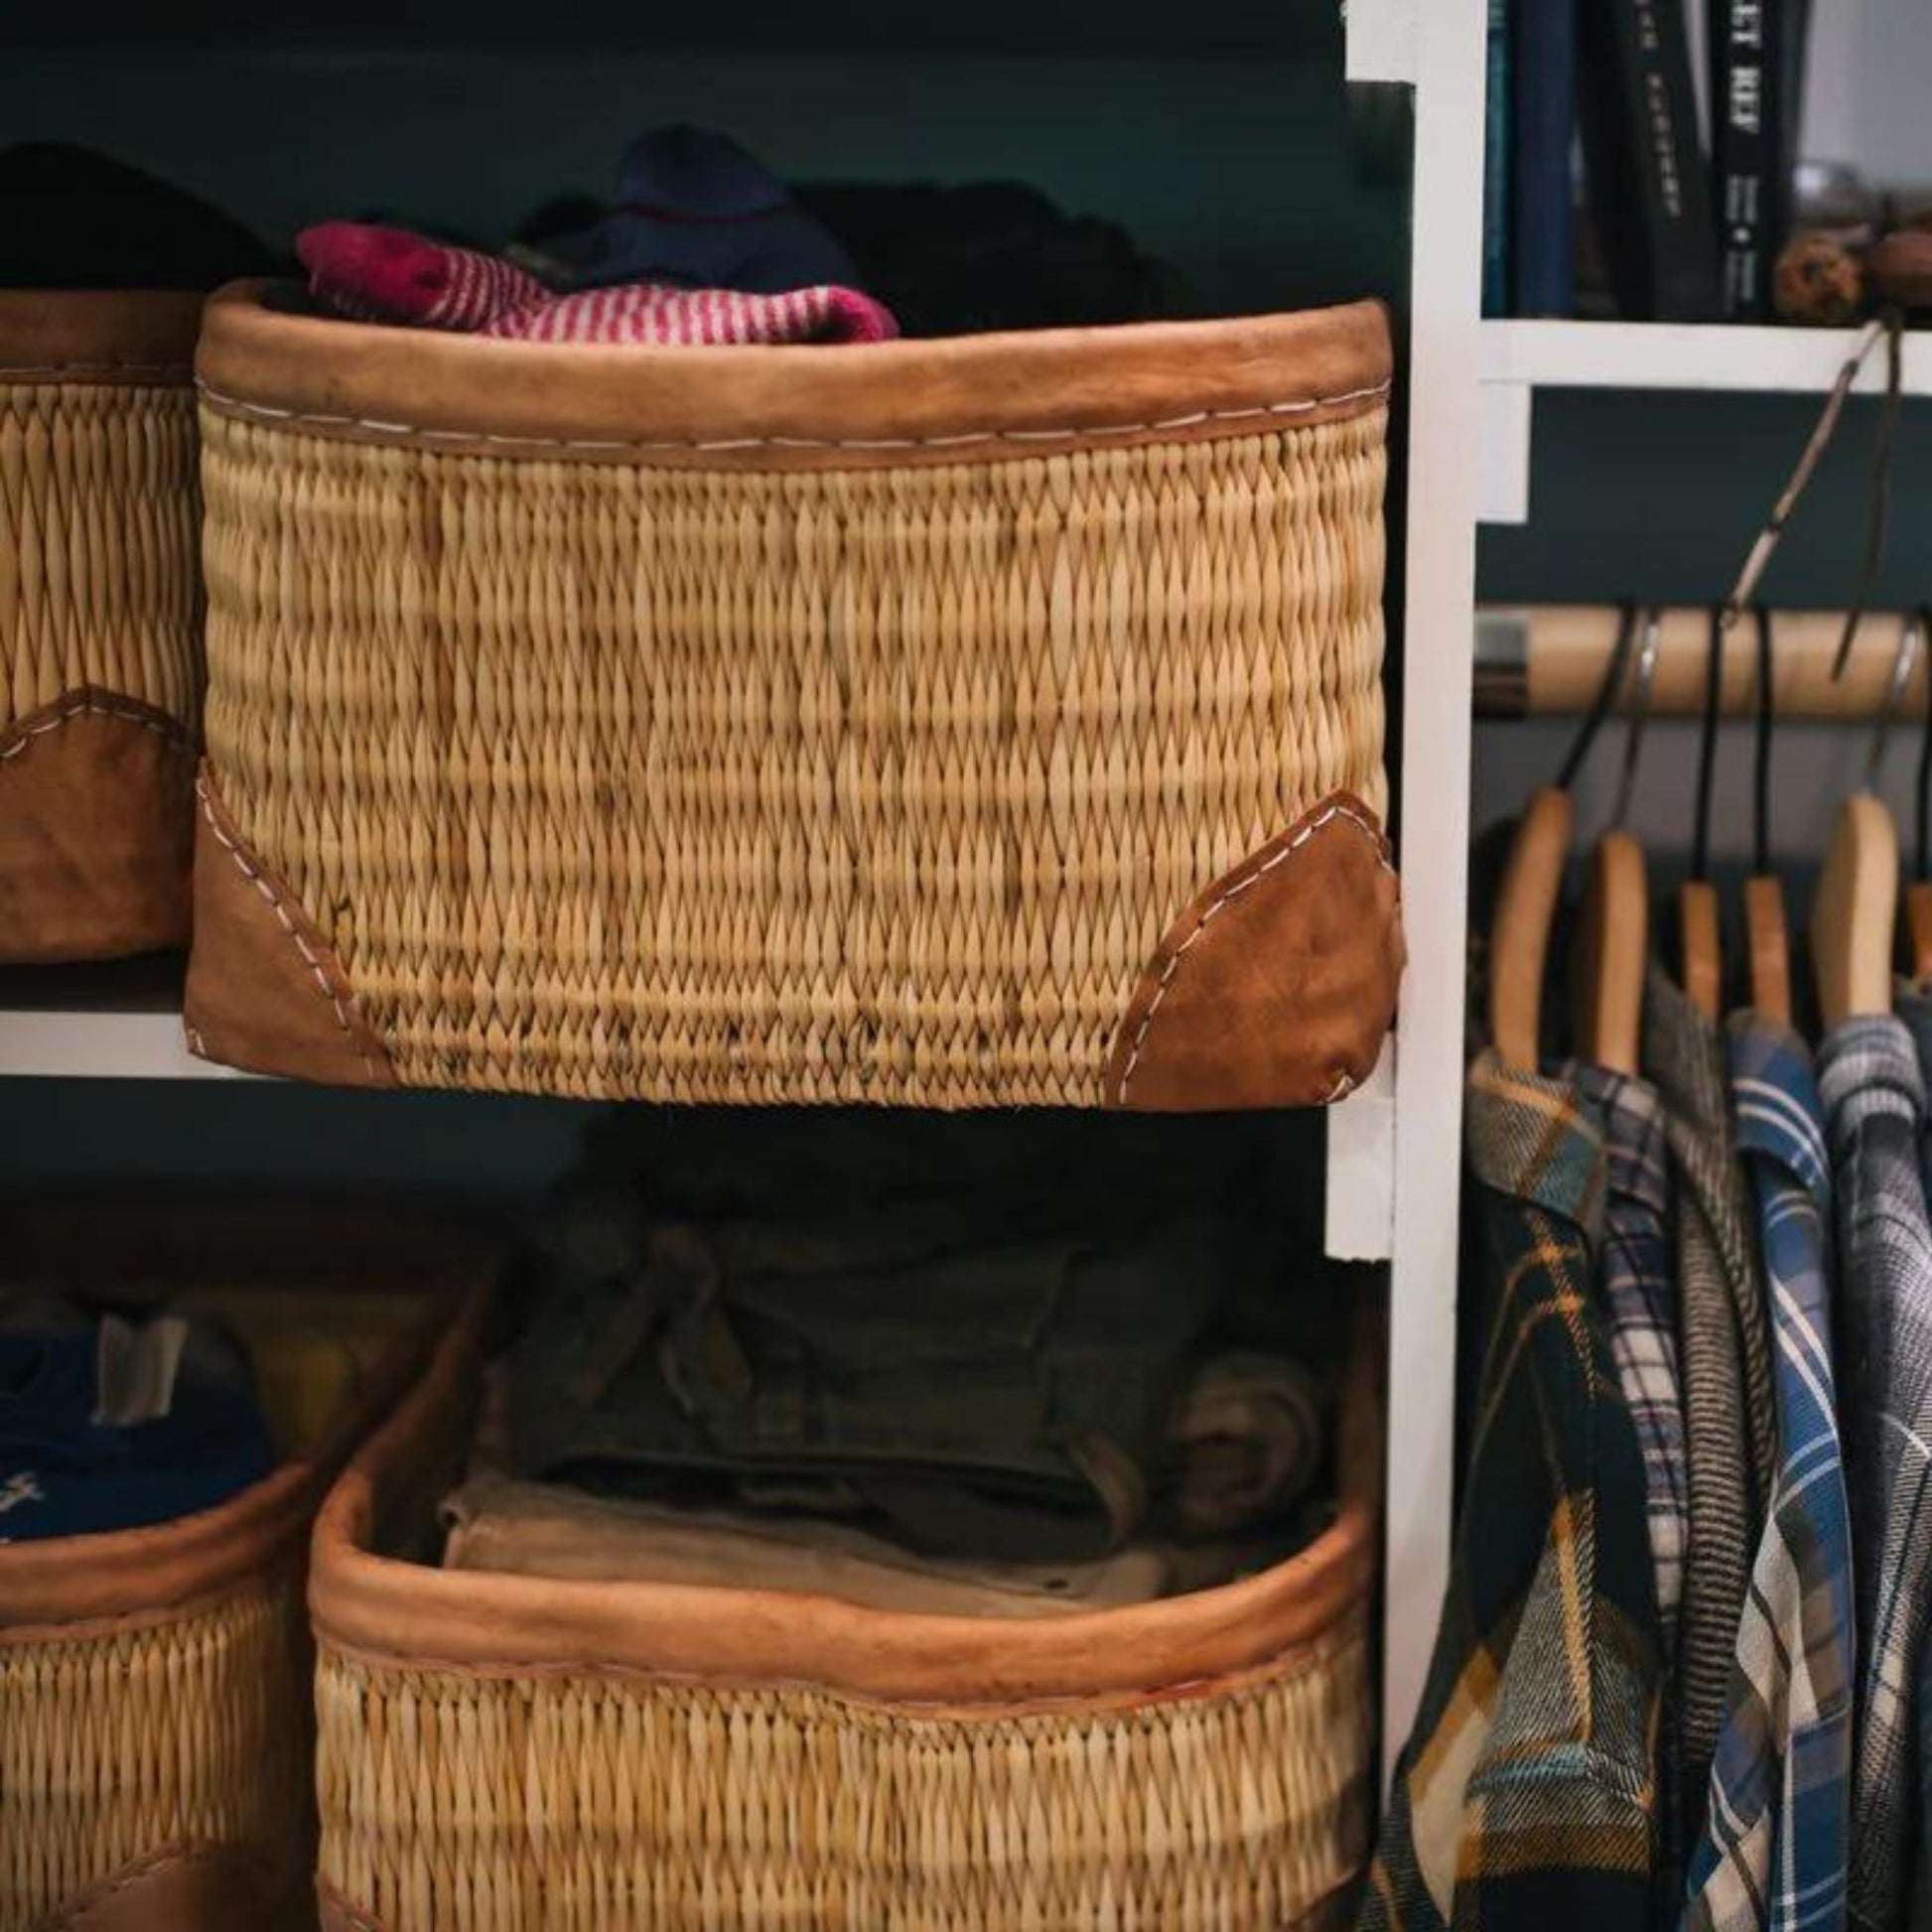 Woven palm and leather-trimmed rectangular baskets shown in use as closet storage